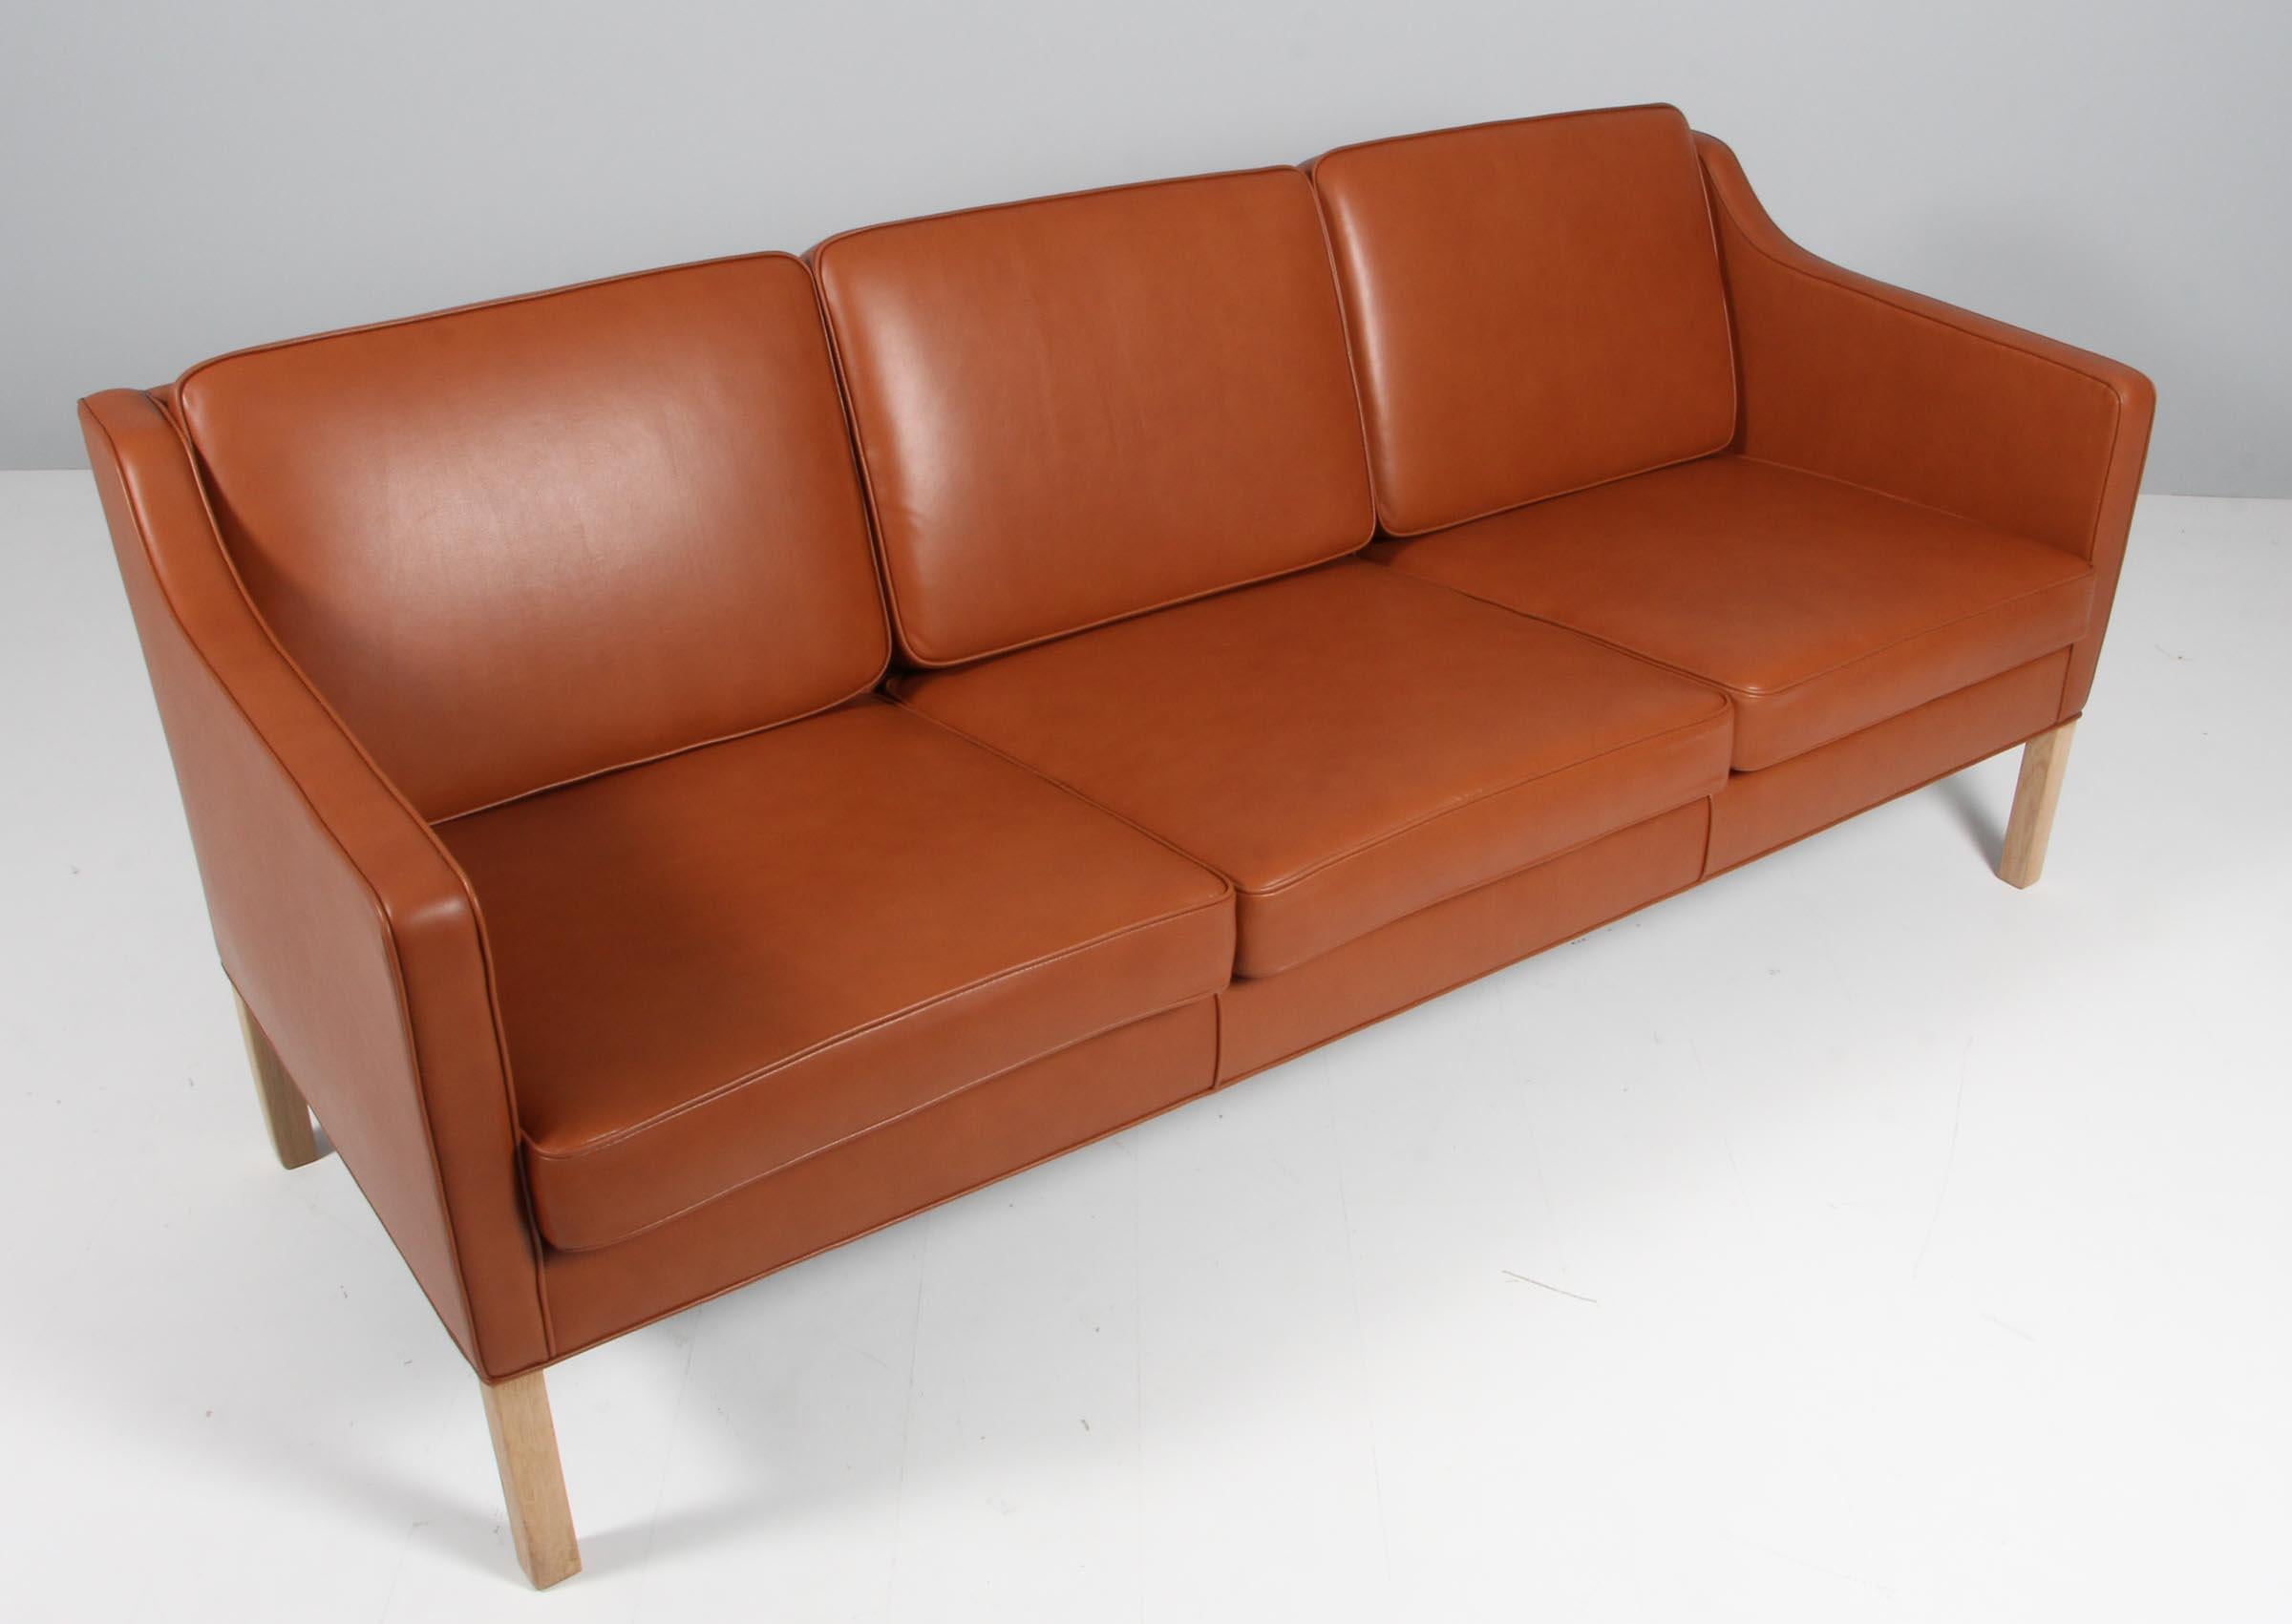 Børge Mogensen three-seat sofa new upholstered with cognac pure aniline leather.

Legs of soap treated oak.

Model 2323, made by Fredericia Furniture.